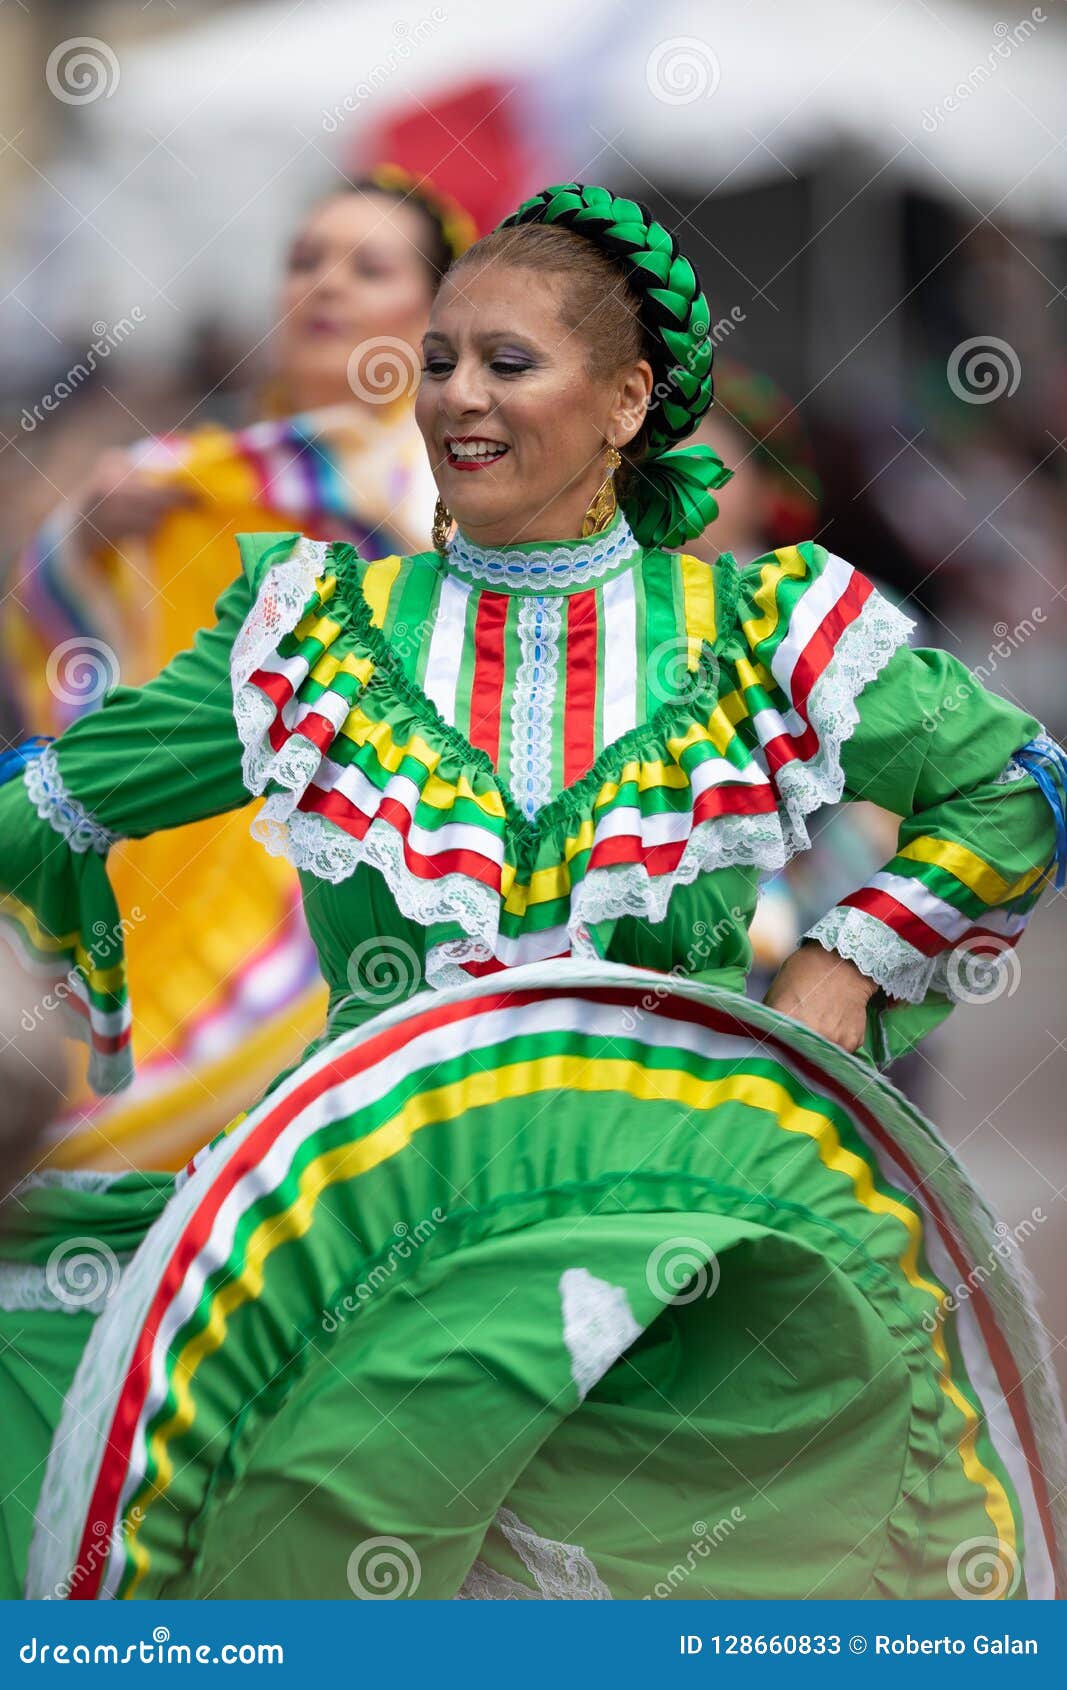 Mexican Independence Parade Editorial Stock Photo - Image of woman ...